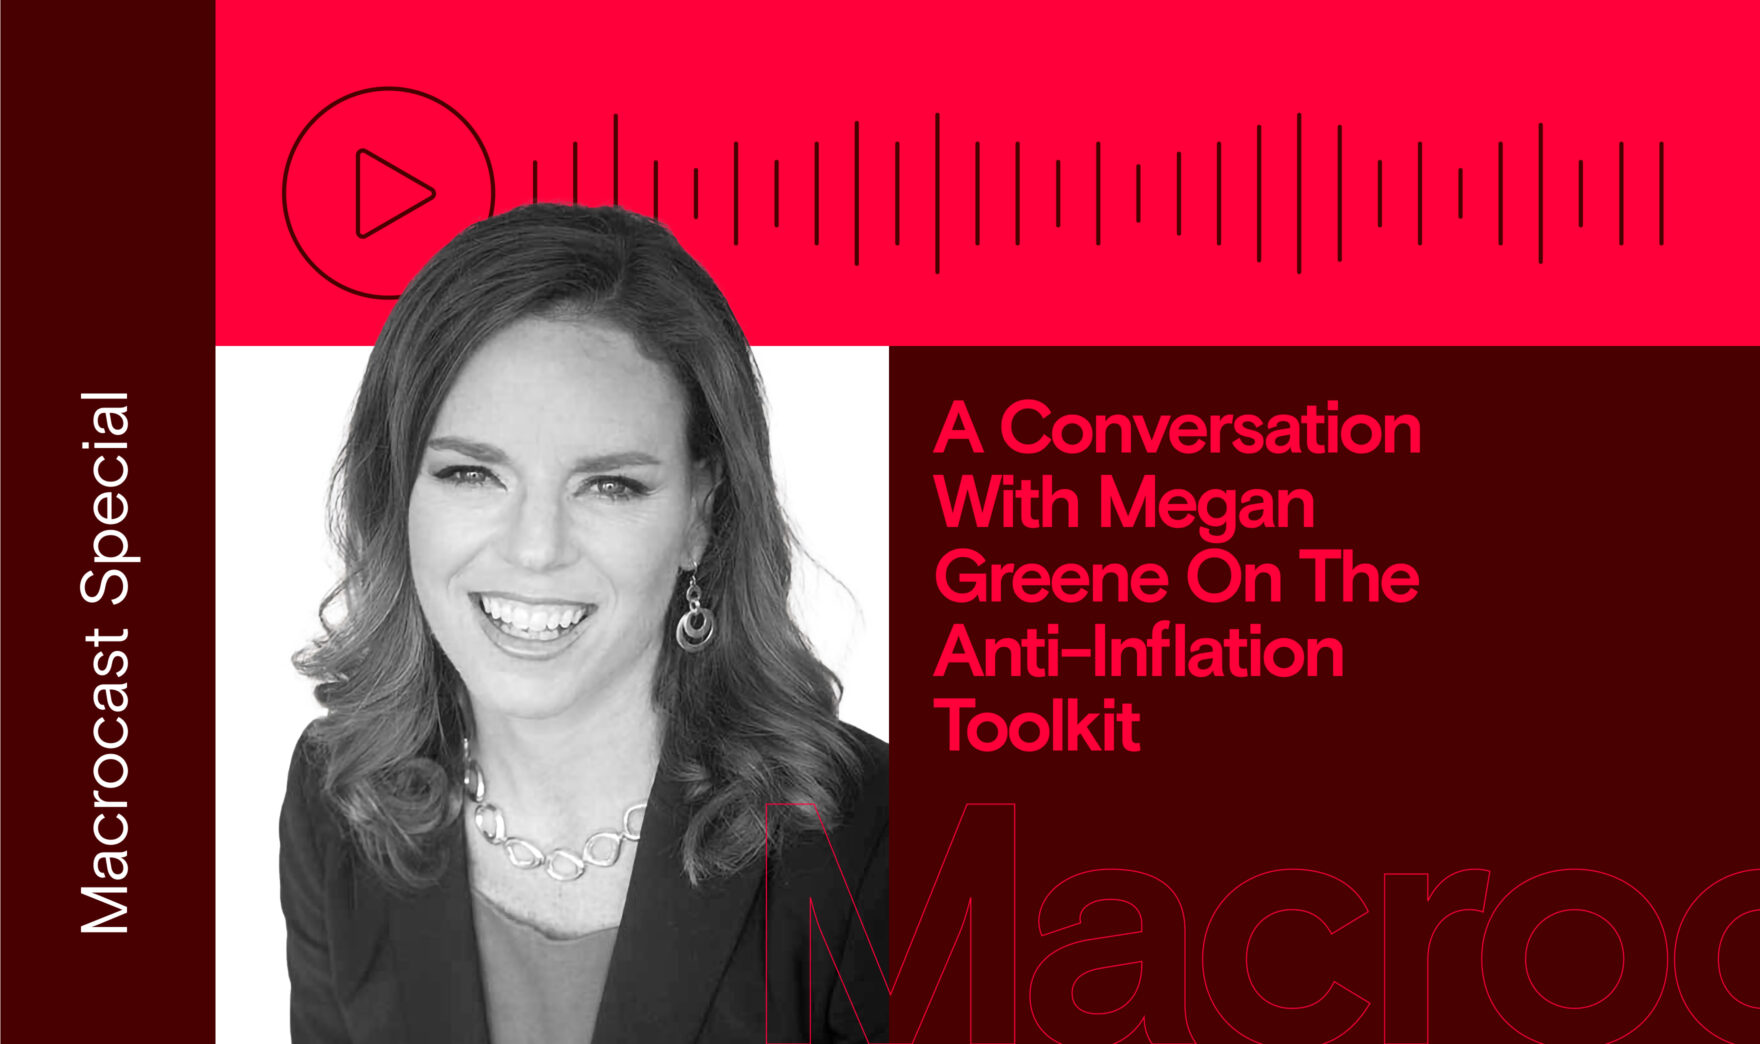 Macrocast Special: A Conversation with Megan Greene on the Anti-Inflation Toolkit